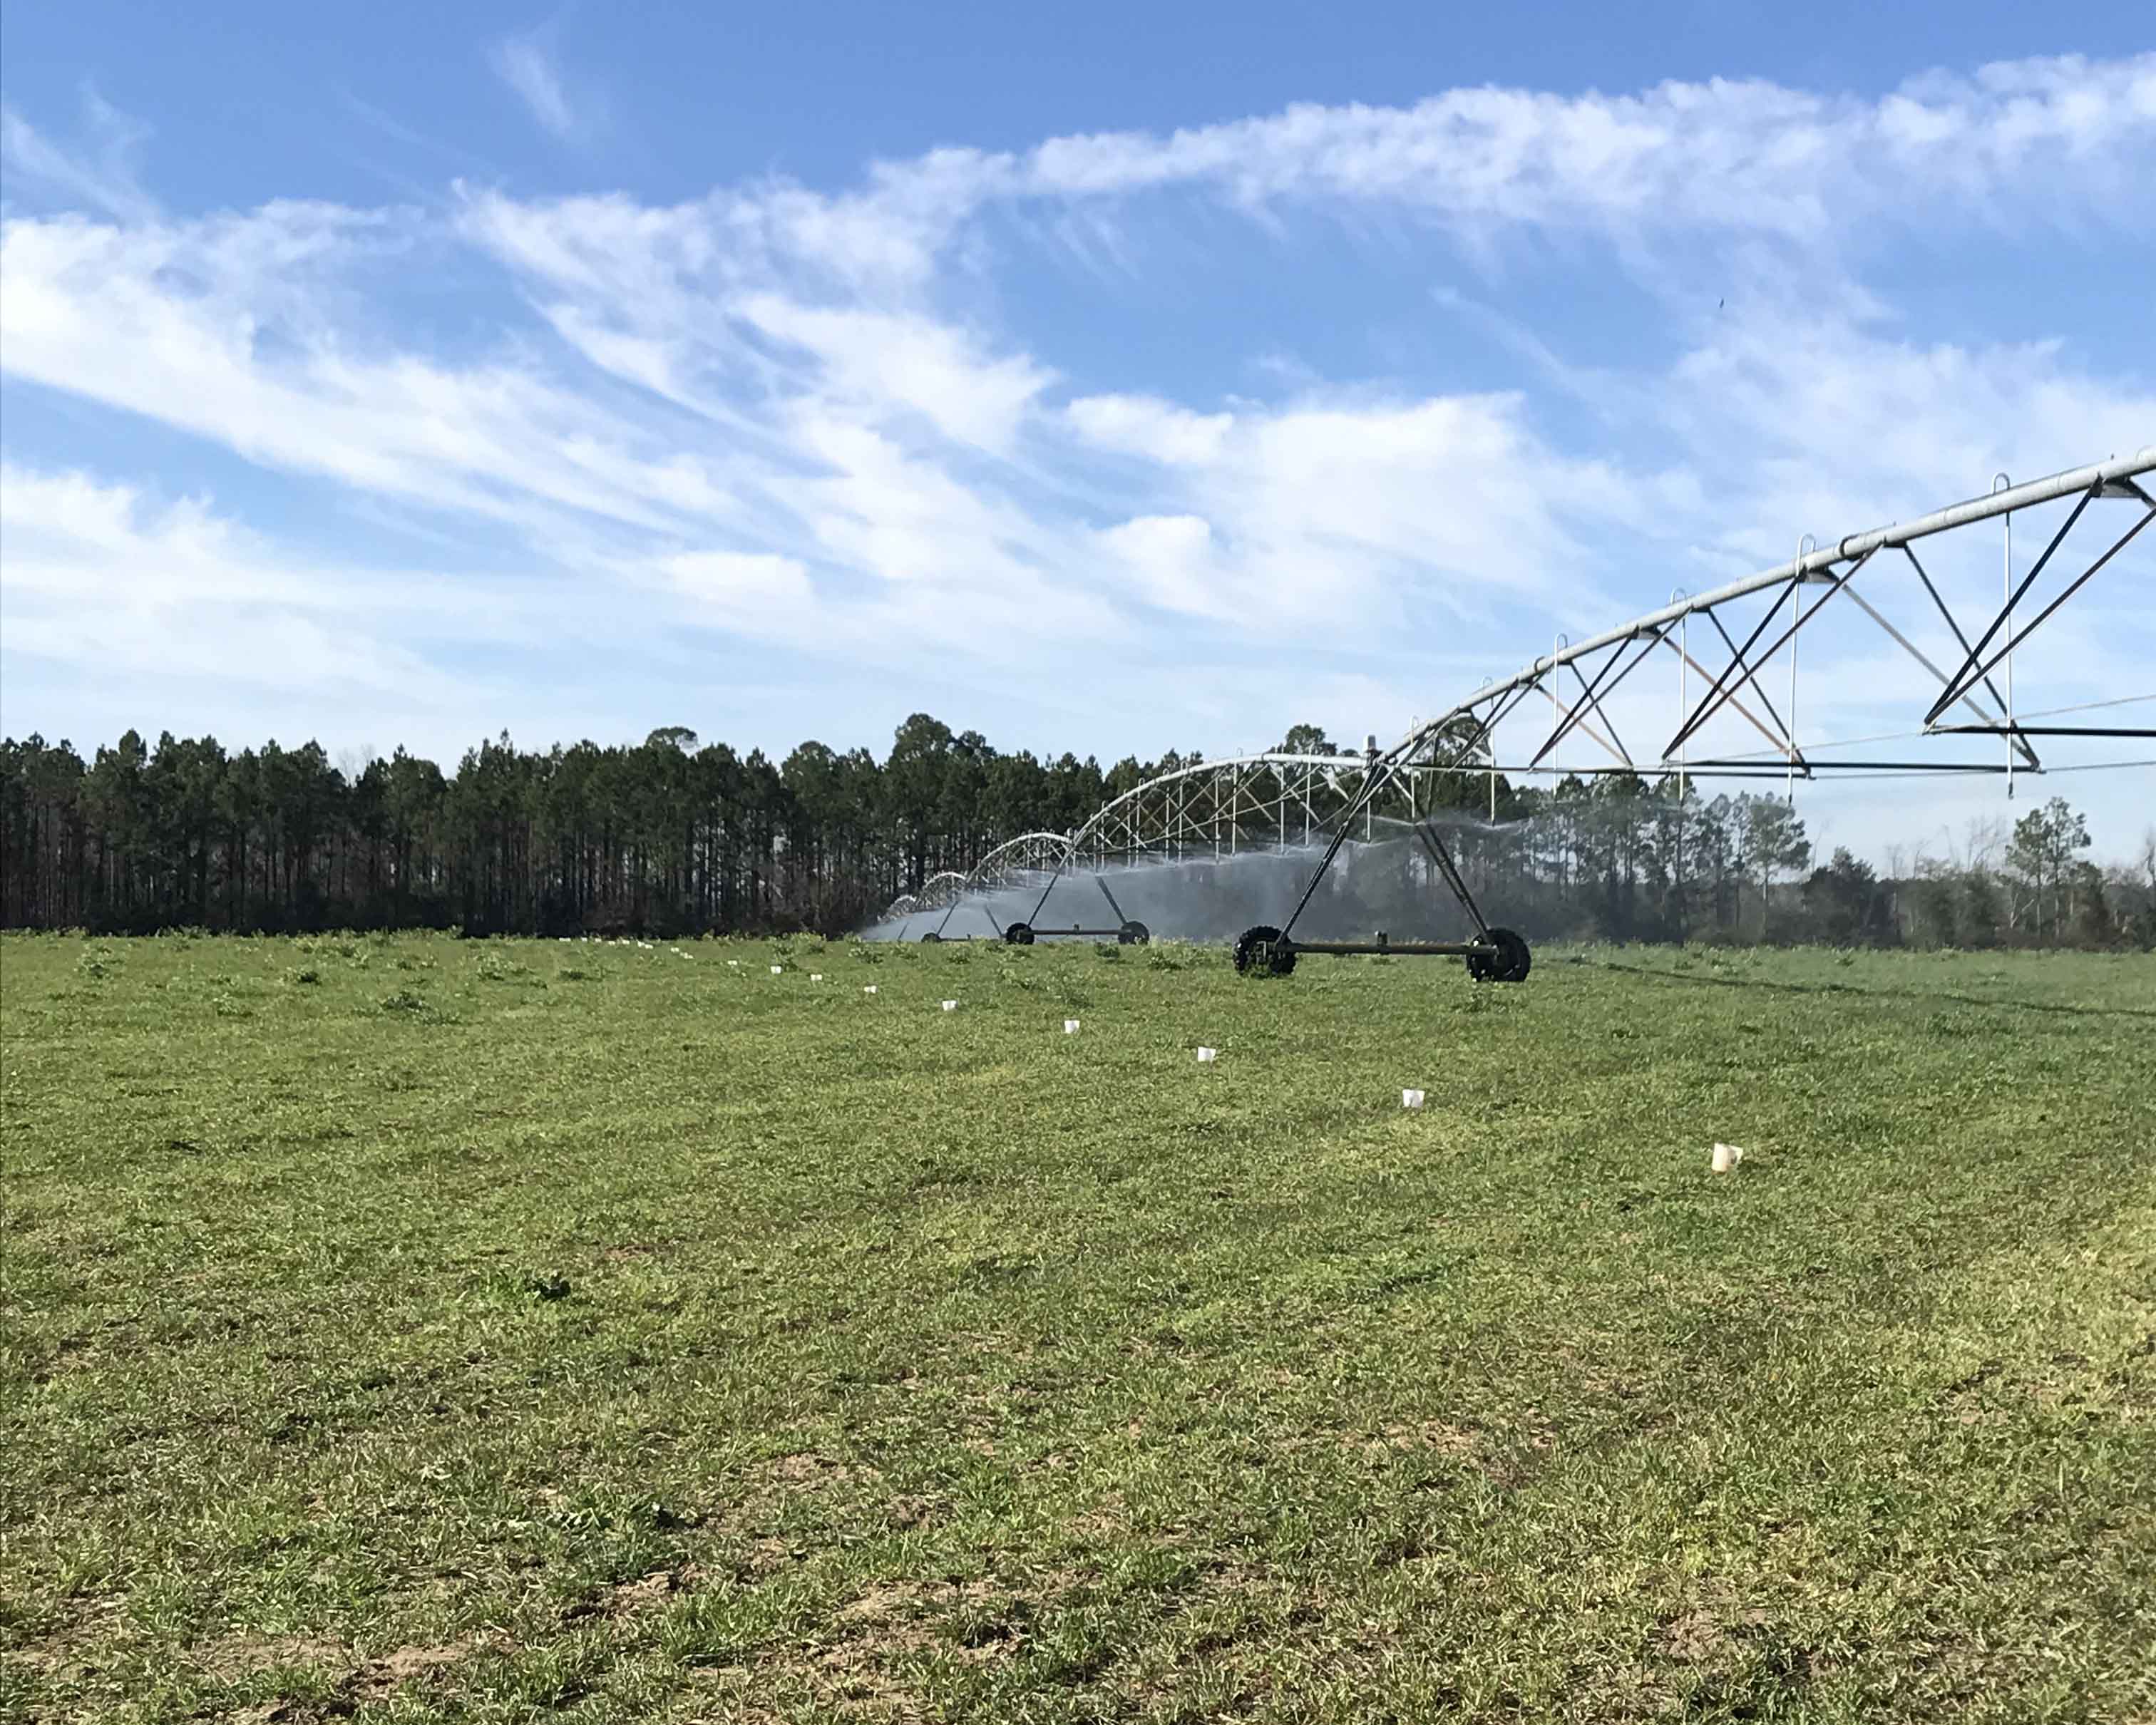 A pivot uniformity or "catch can" test is conducted to verify that the system is applying water uniformly. Performing irrigation system maintenance during the winter months can ensure the system’s longevity.